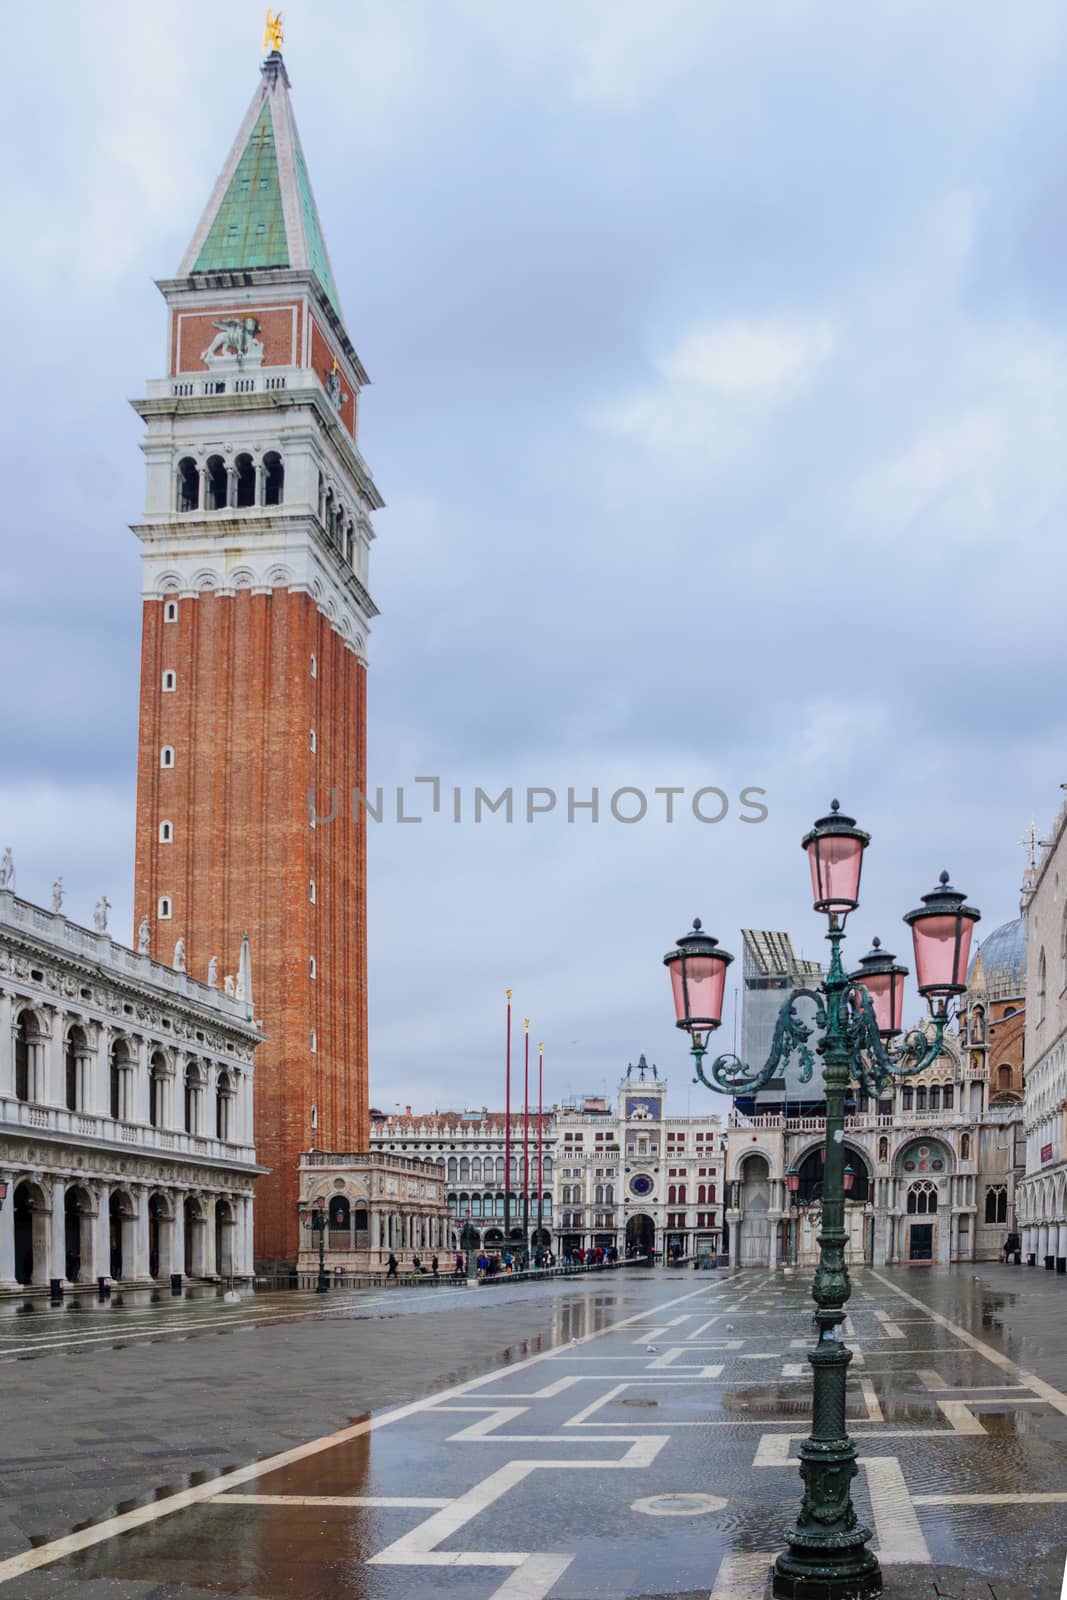 The flooded Piazza San Marco, in Venice, Veneto, Italy